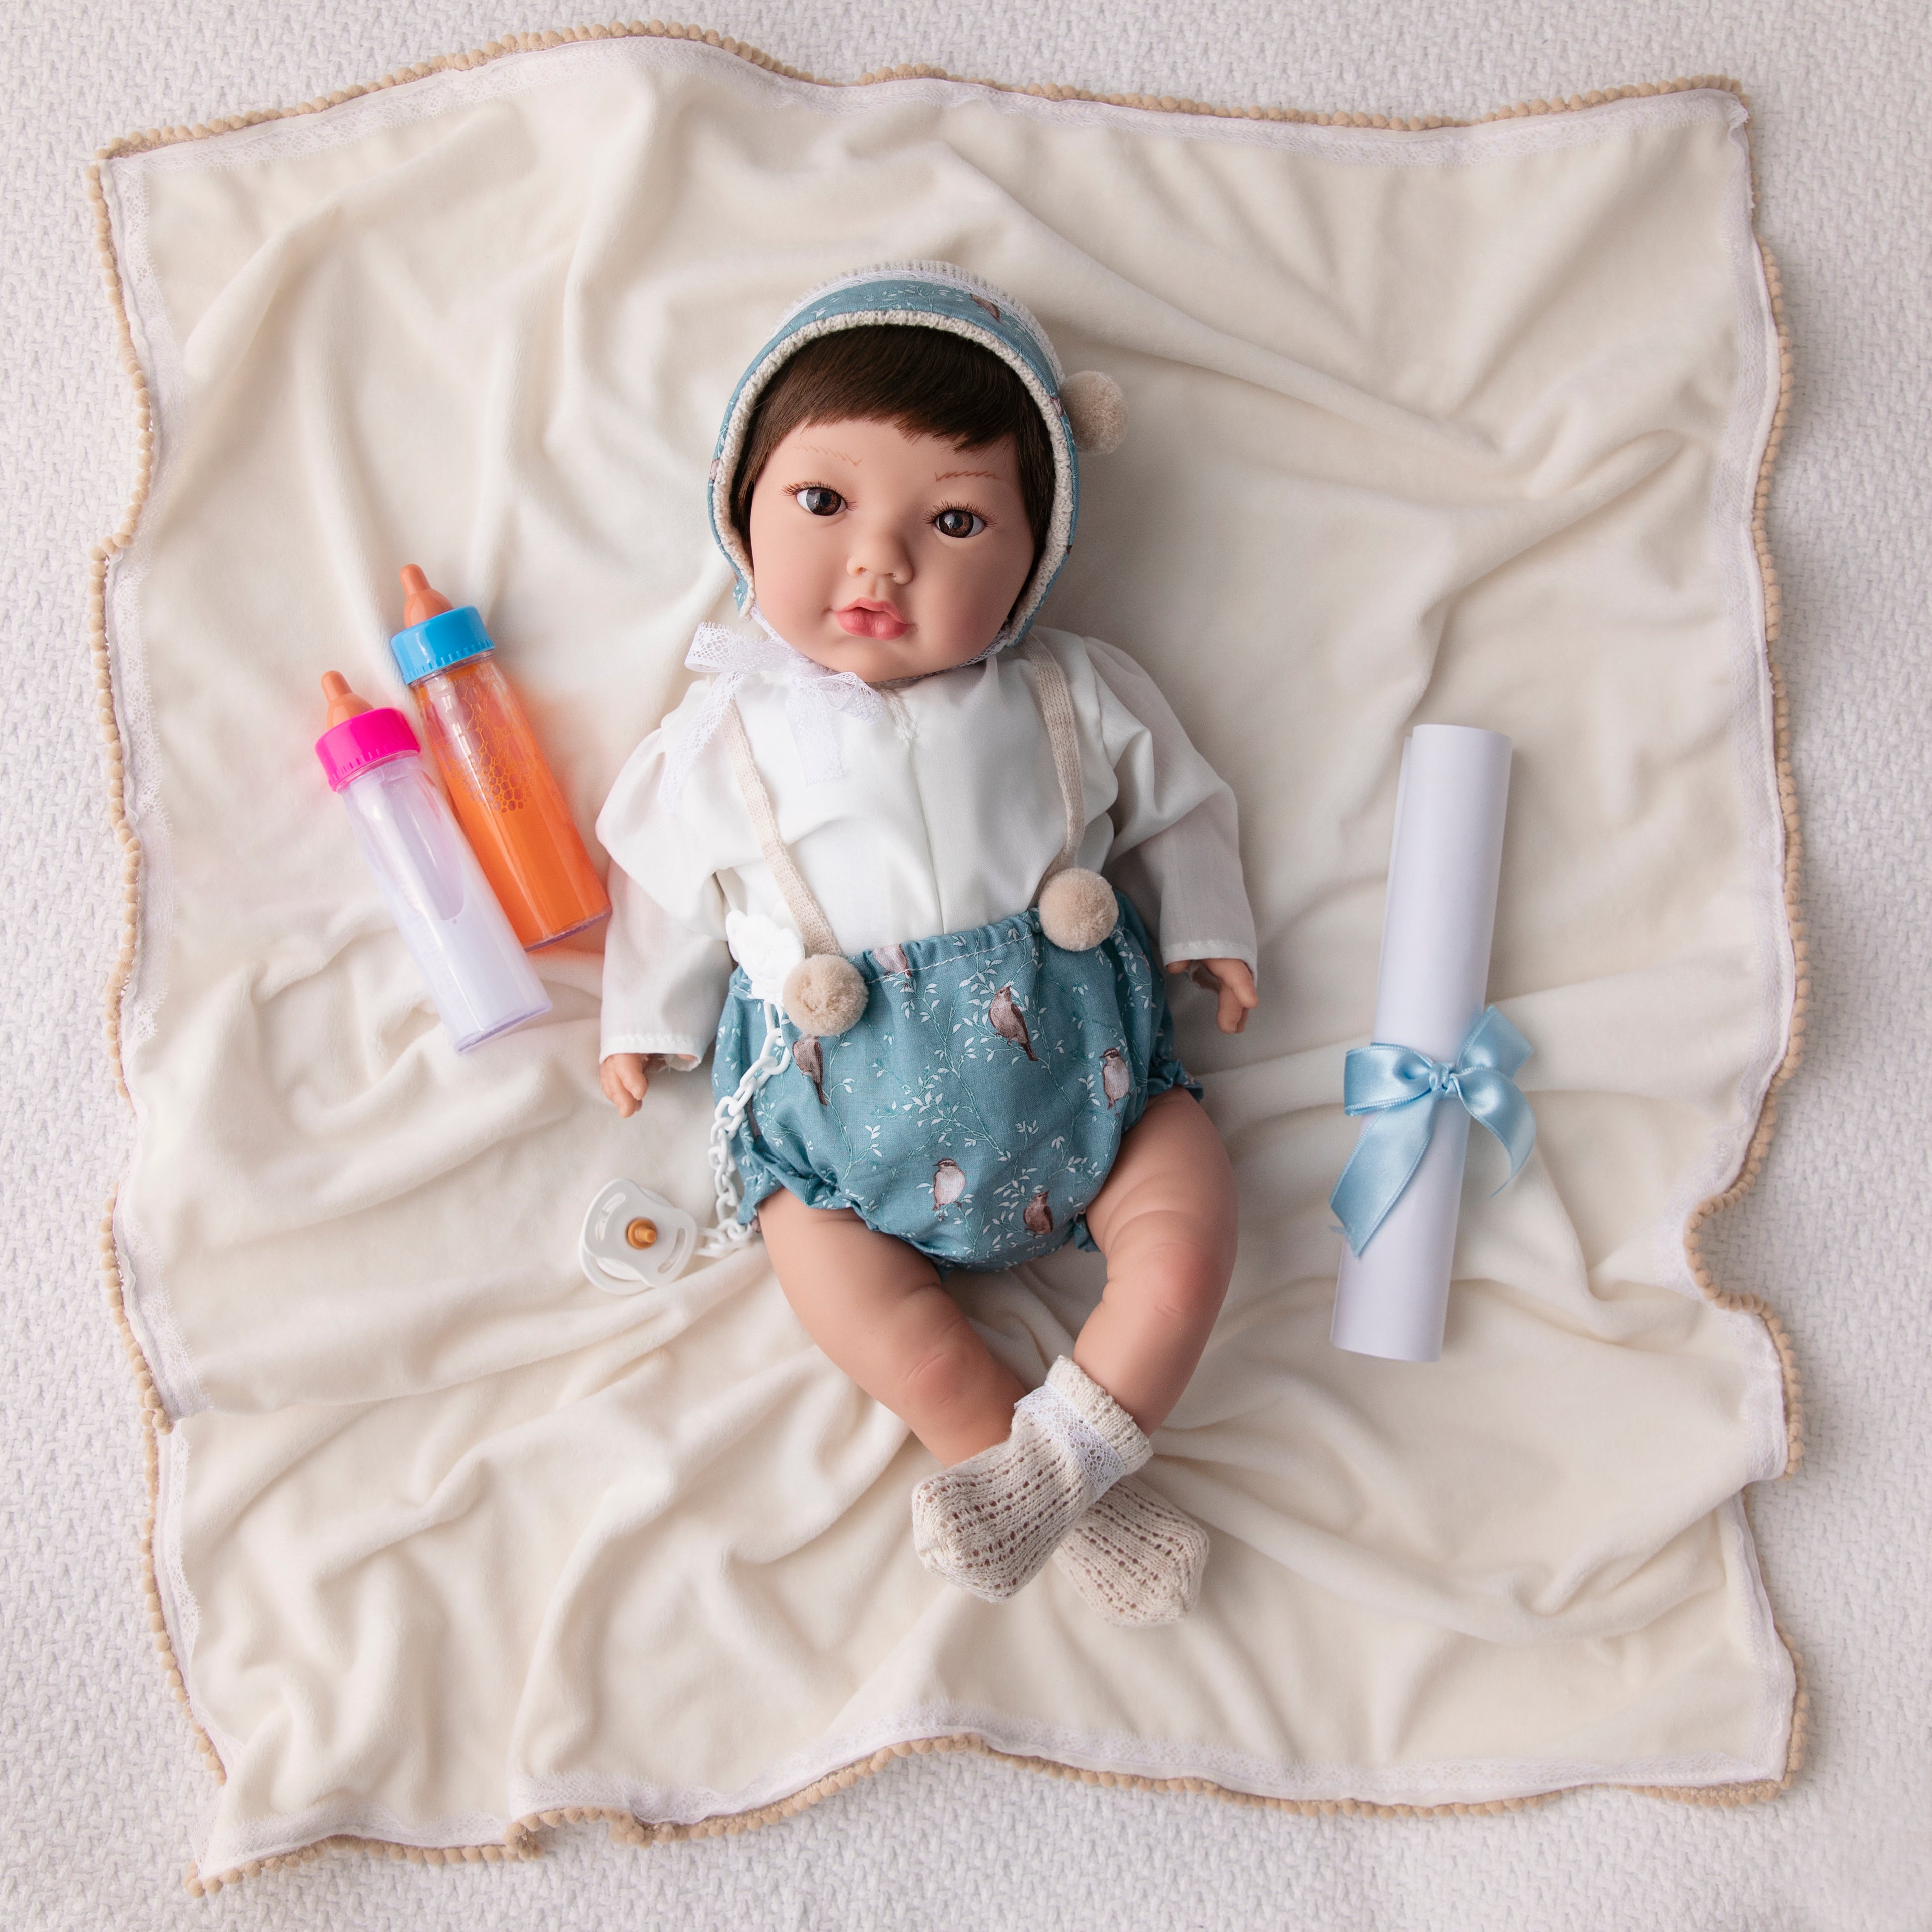 Reborn Baby Doll Reborn Paolo - 48CM and 2KG - SILICONE VINYL and HEAD DROPPING EFFECT